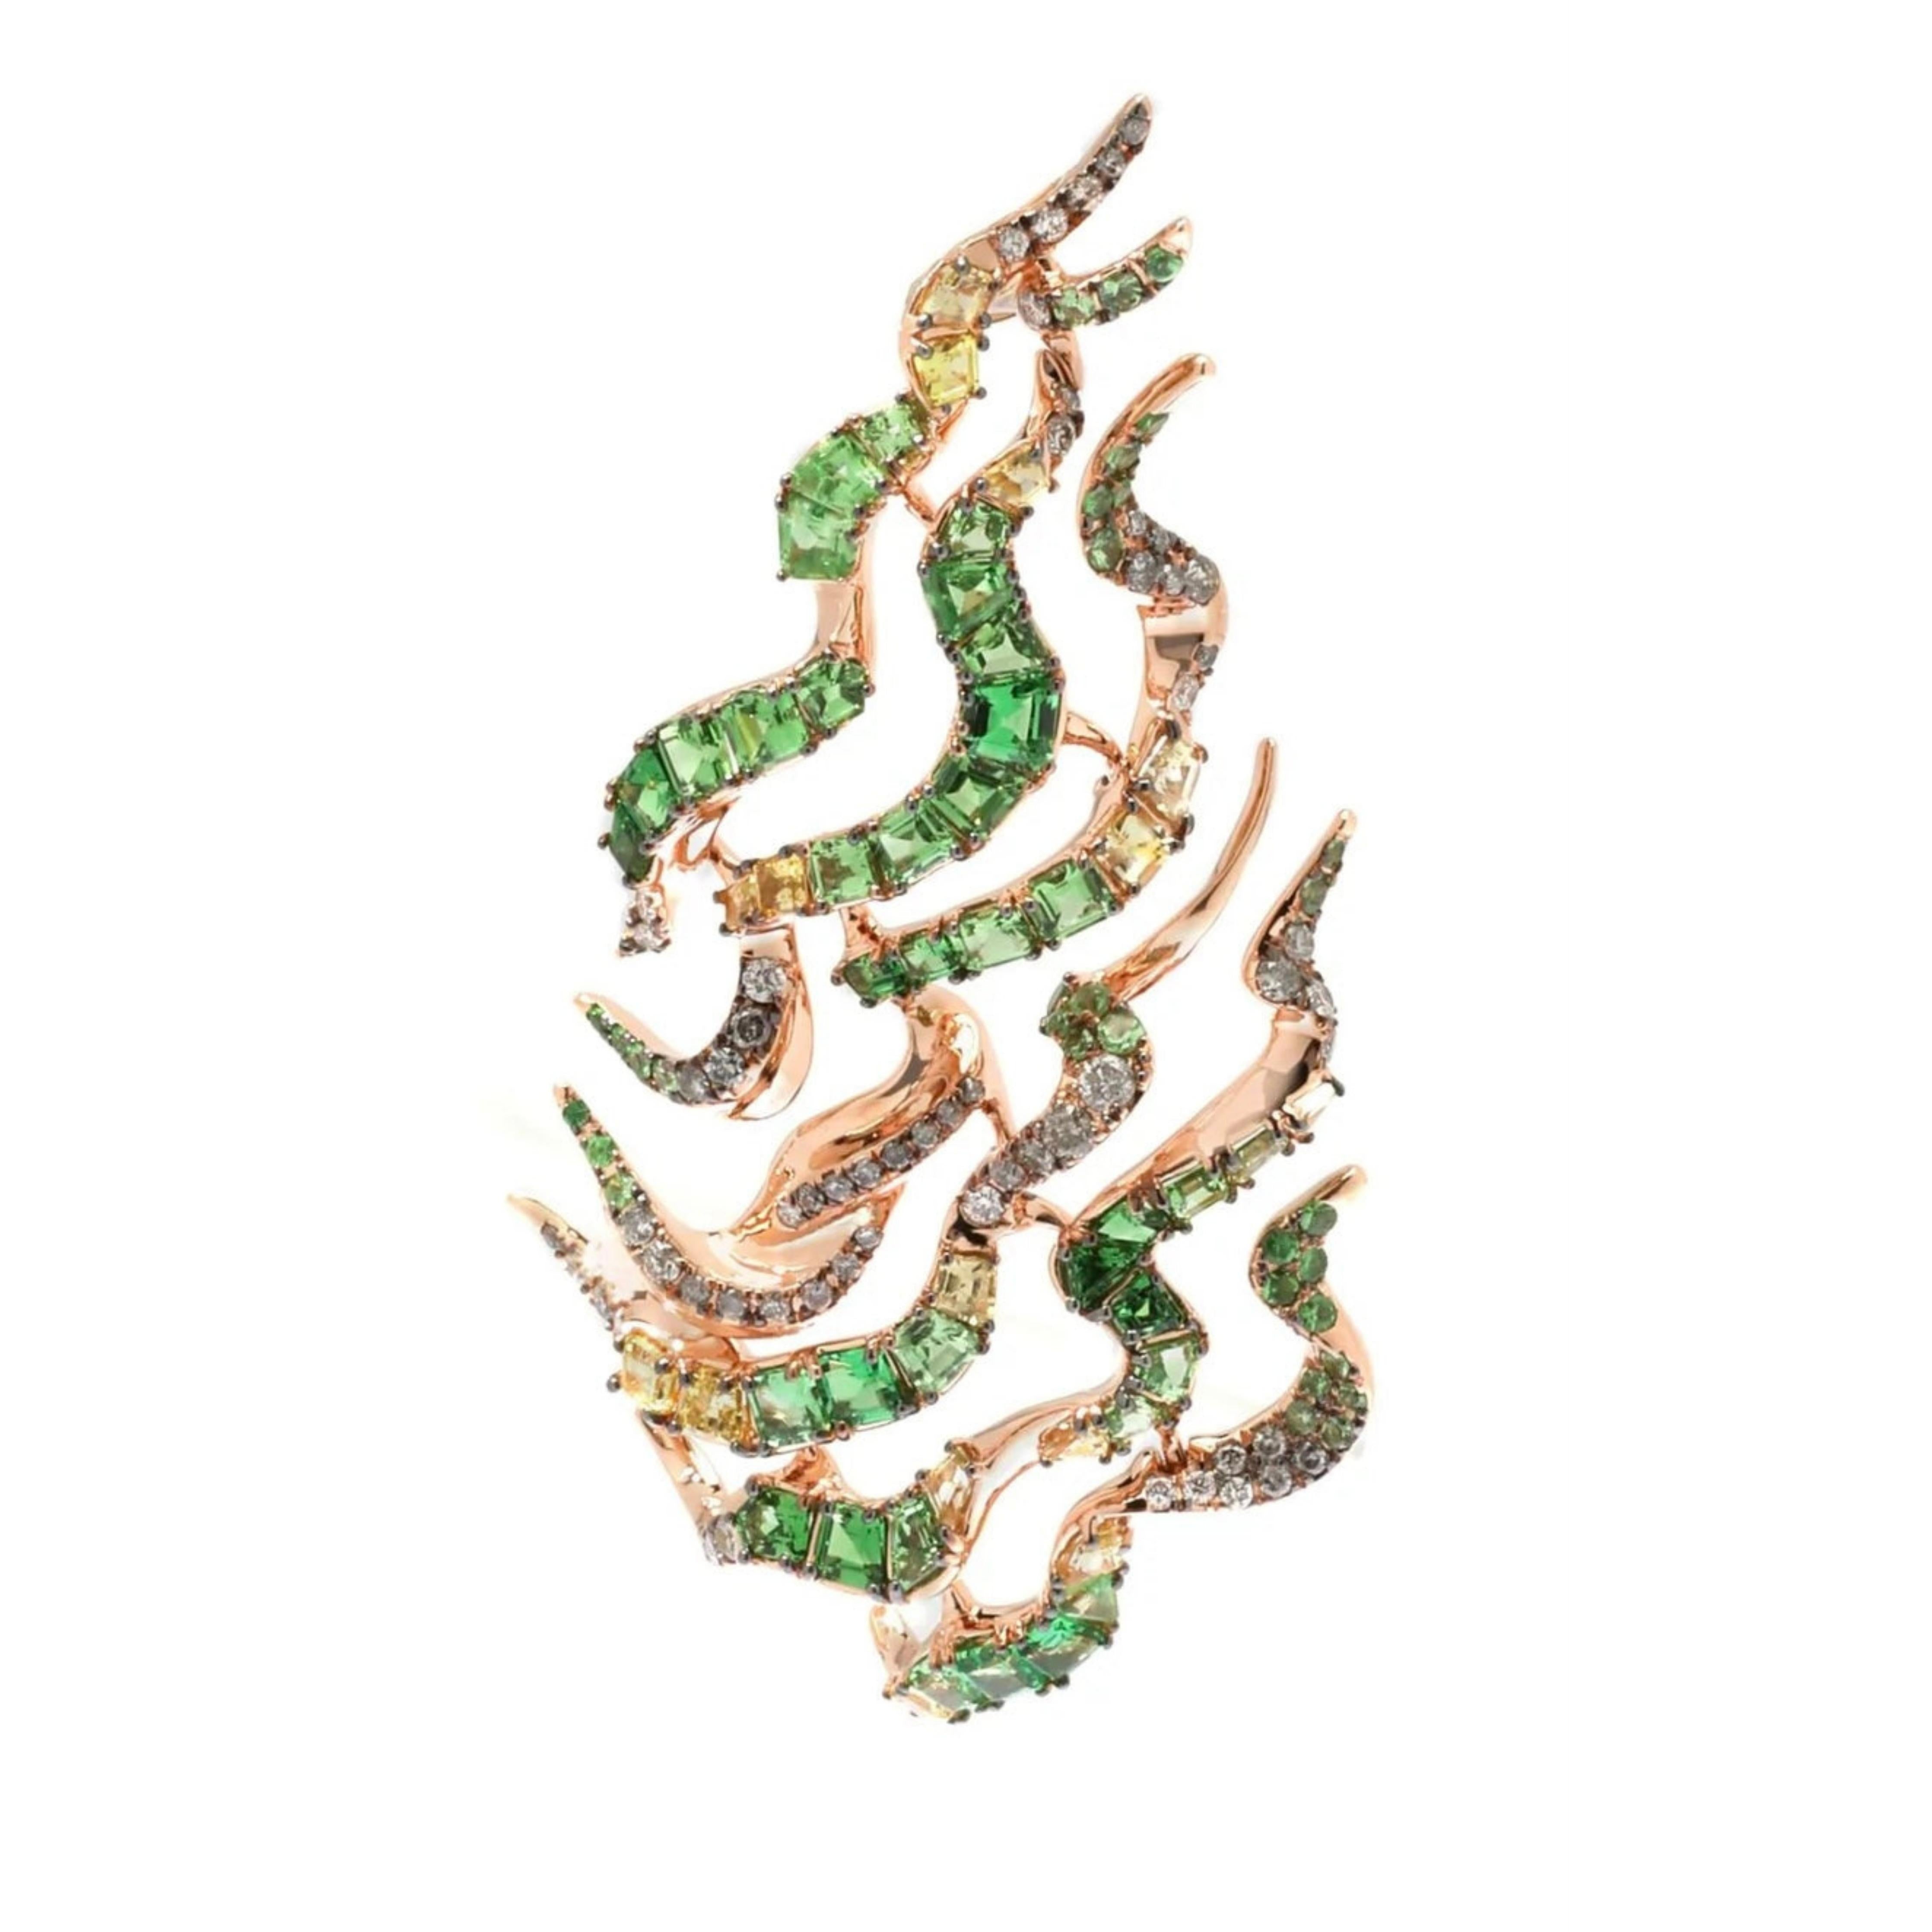 Bibi van der Velden Tsavorite Single Smoke Haze Earring. Crafted from multiple tsavorites, white and grey diamonds, and yellow sapphires and set in 18K Rose Gold this single earring invokes the beauty of a swirling haze of smoke. Shown from the front.